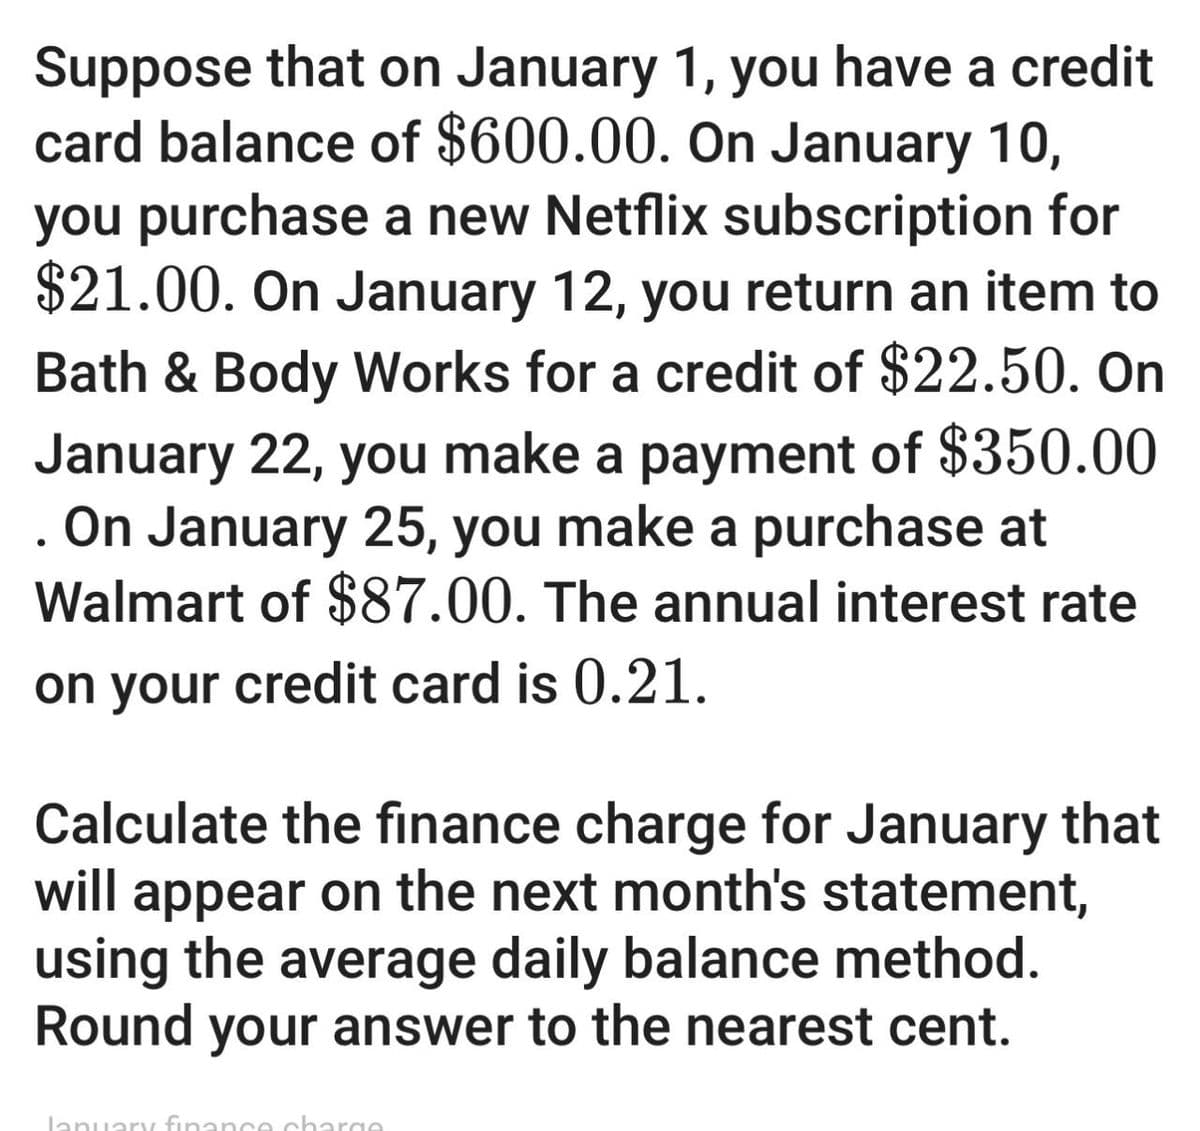 •
Suppose that on January 1, you have a credit
card balance of $600.00. On January 10,
you purchase a new Netflix subscription for
$21.00. On January 12, you return an item to
Bath & Body Works for a credit of $22.50. On
January 22, you make a payment of $350.00
On January 25, you make a purchase at
Walmart of $87.00. The annual interest rate
on your credit card is 0.21.
Calculate the finance charge for January that
will appear on the next month's statement,
using the average daily balance method.
Round your answer to the nearest cent.
January finance charge.